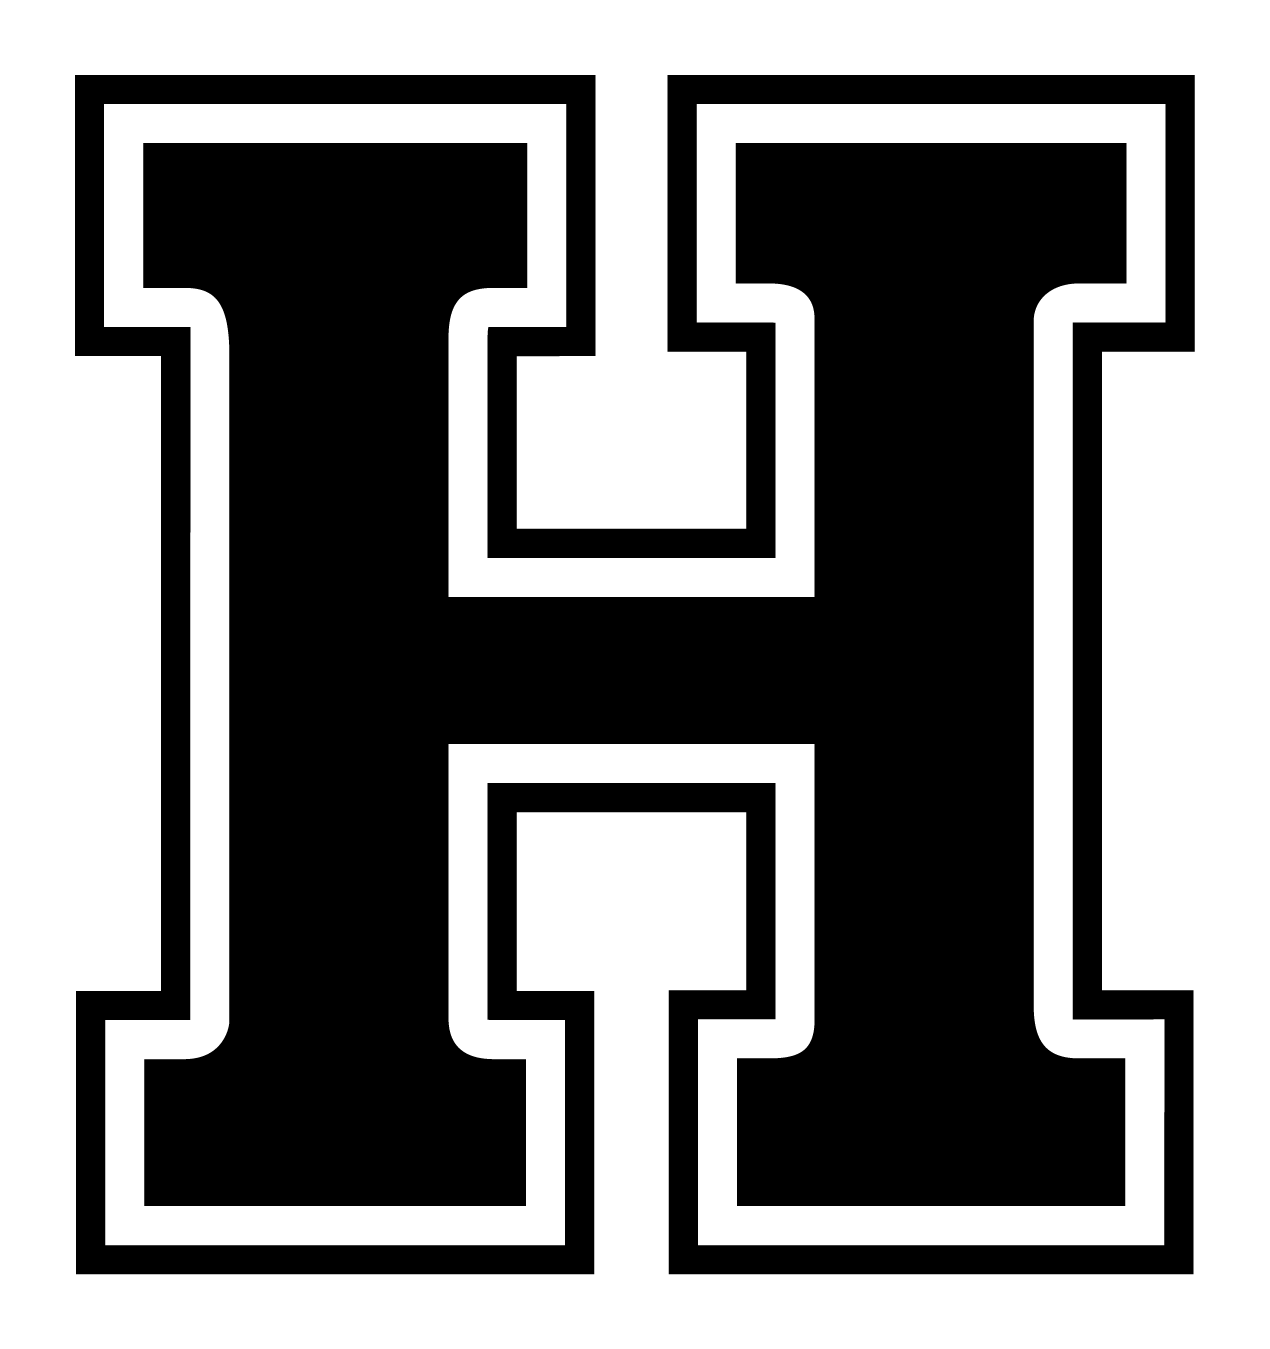 Blue and White Sports Logo - Downloadable Athletics Logos | Hope College